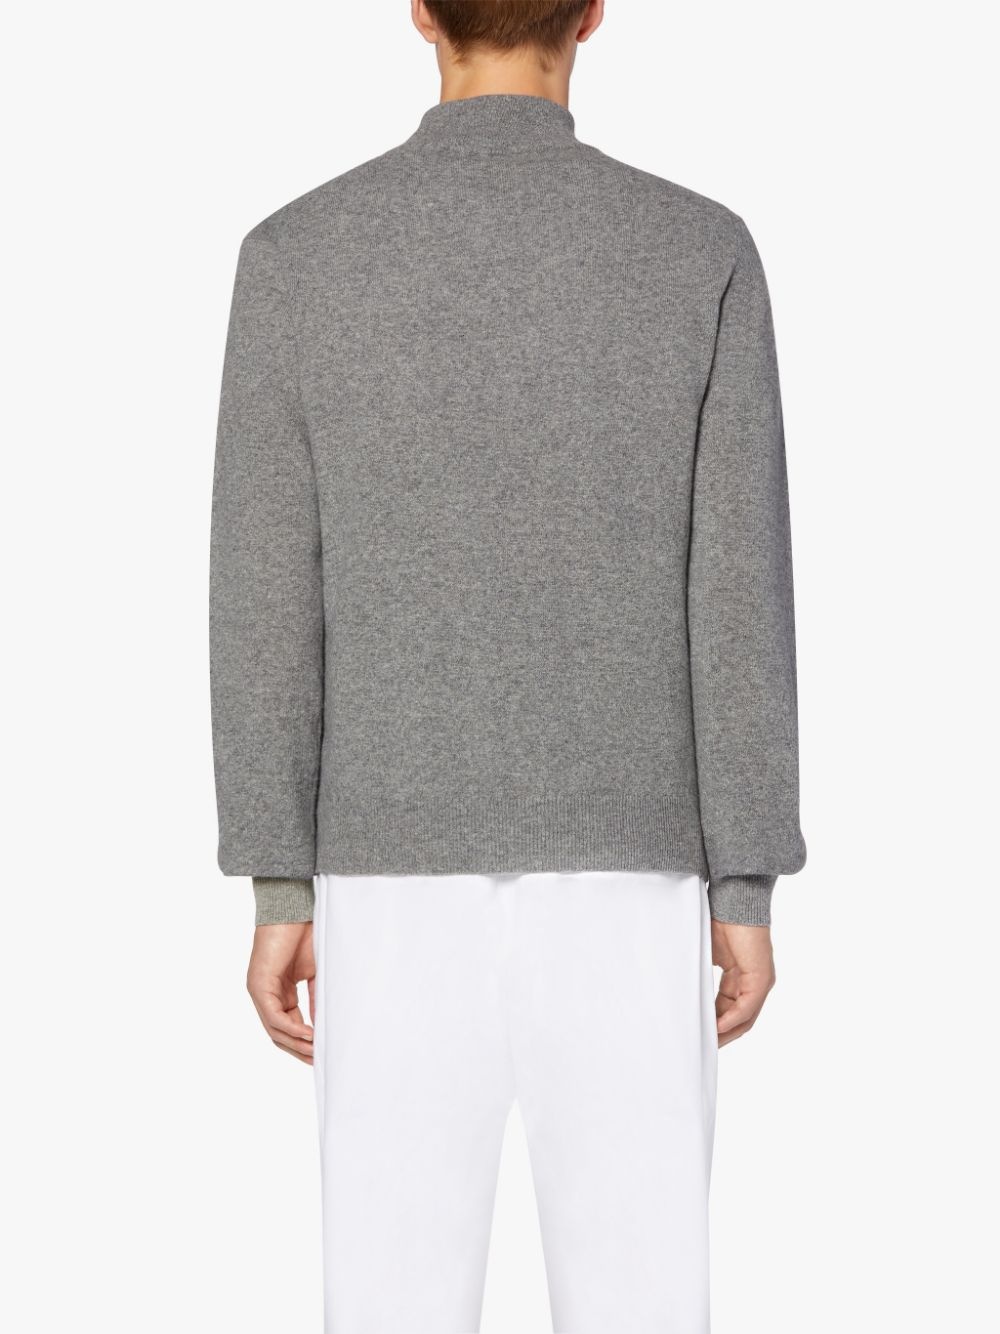 IN AND OUT GREY WOOL SWEATER | GKM-203 - 4